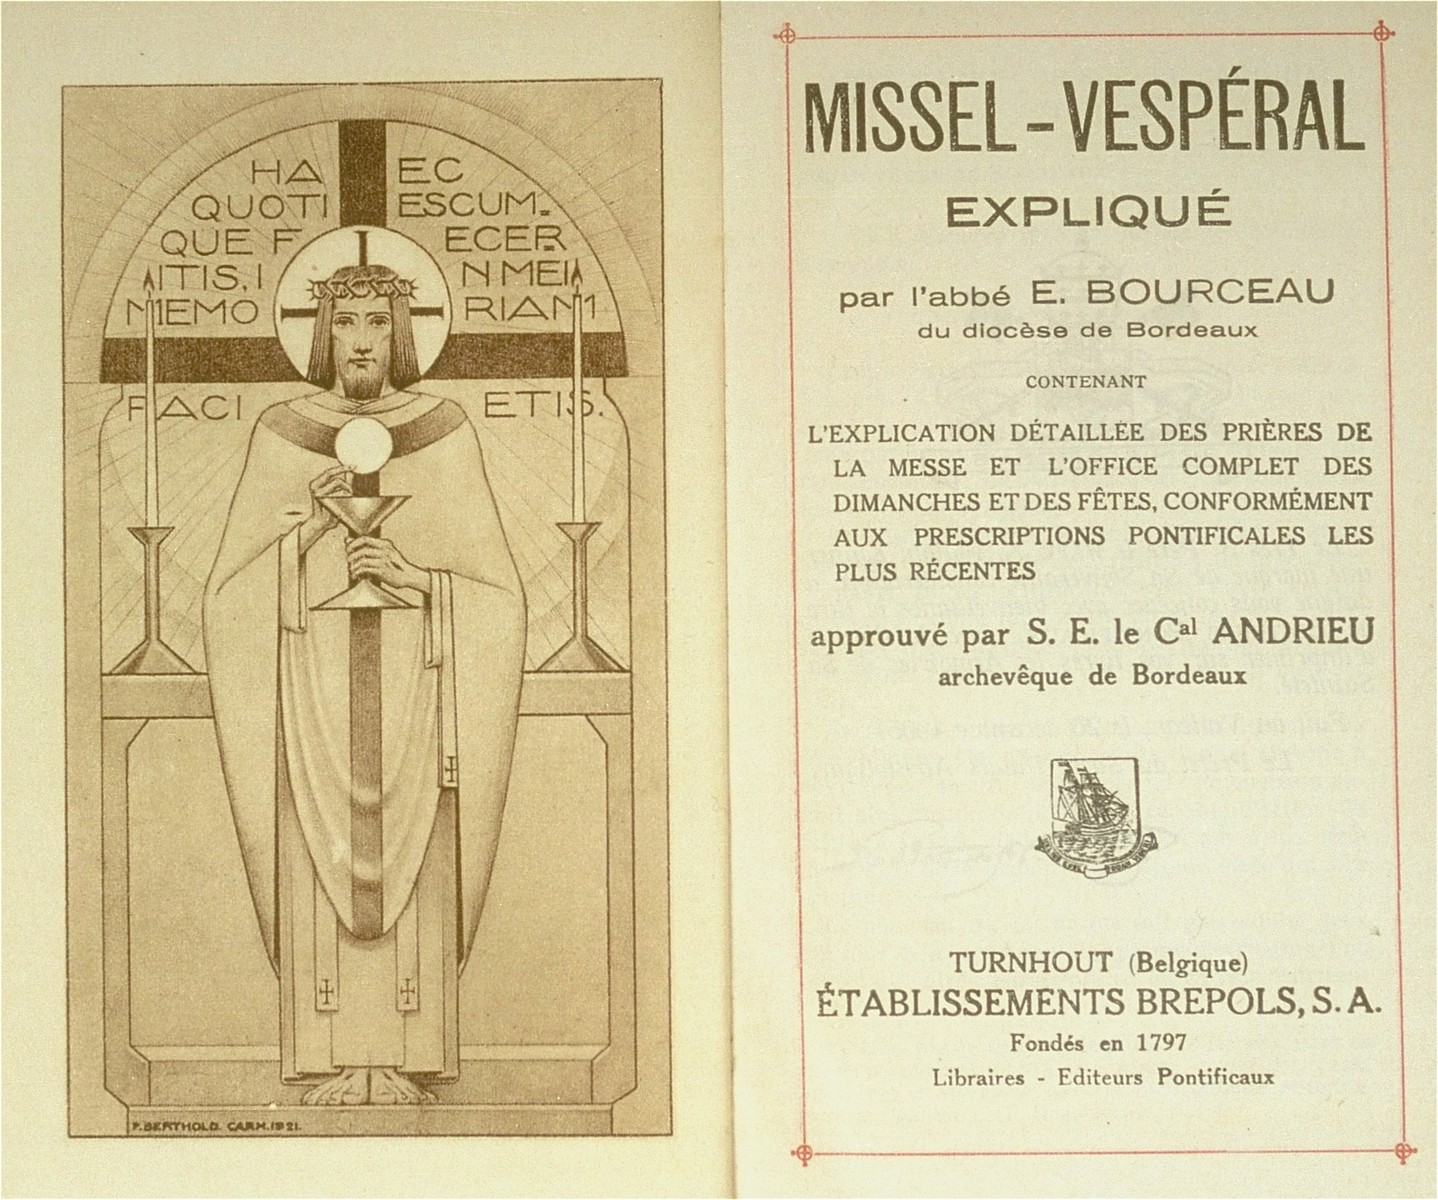 Title page of a Catholic prayerbook given to the donor, Sara Lamhaut, a Belgian-Jewish child in hiding at the Soeurs de Sainte Marie convent school in Wezembeek-Oppem near Brussels, on the occasion of her First Communion.